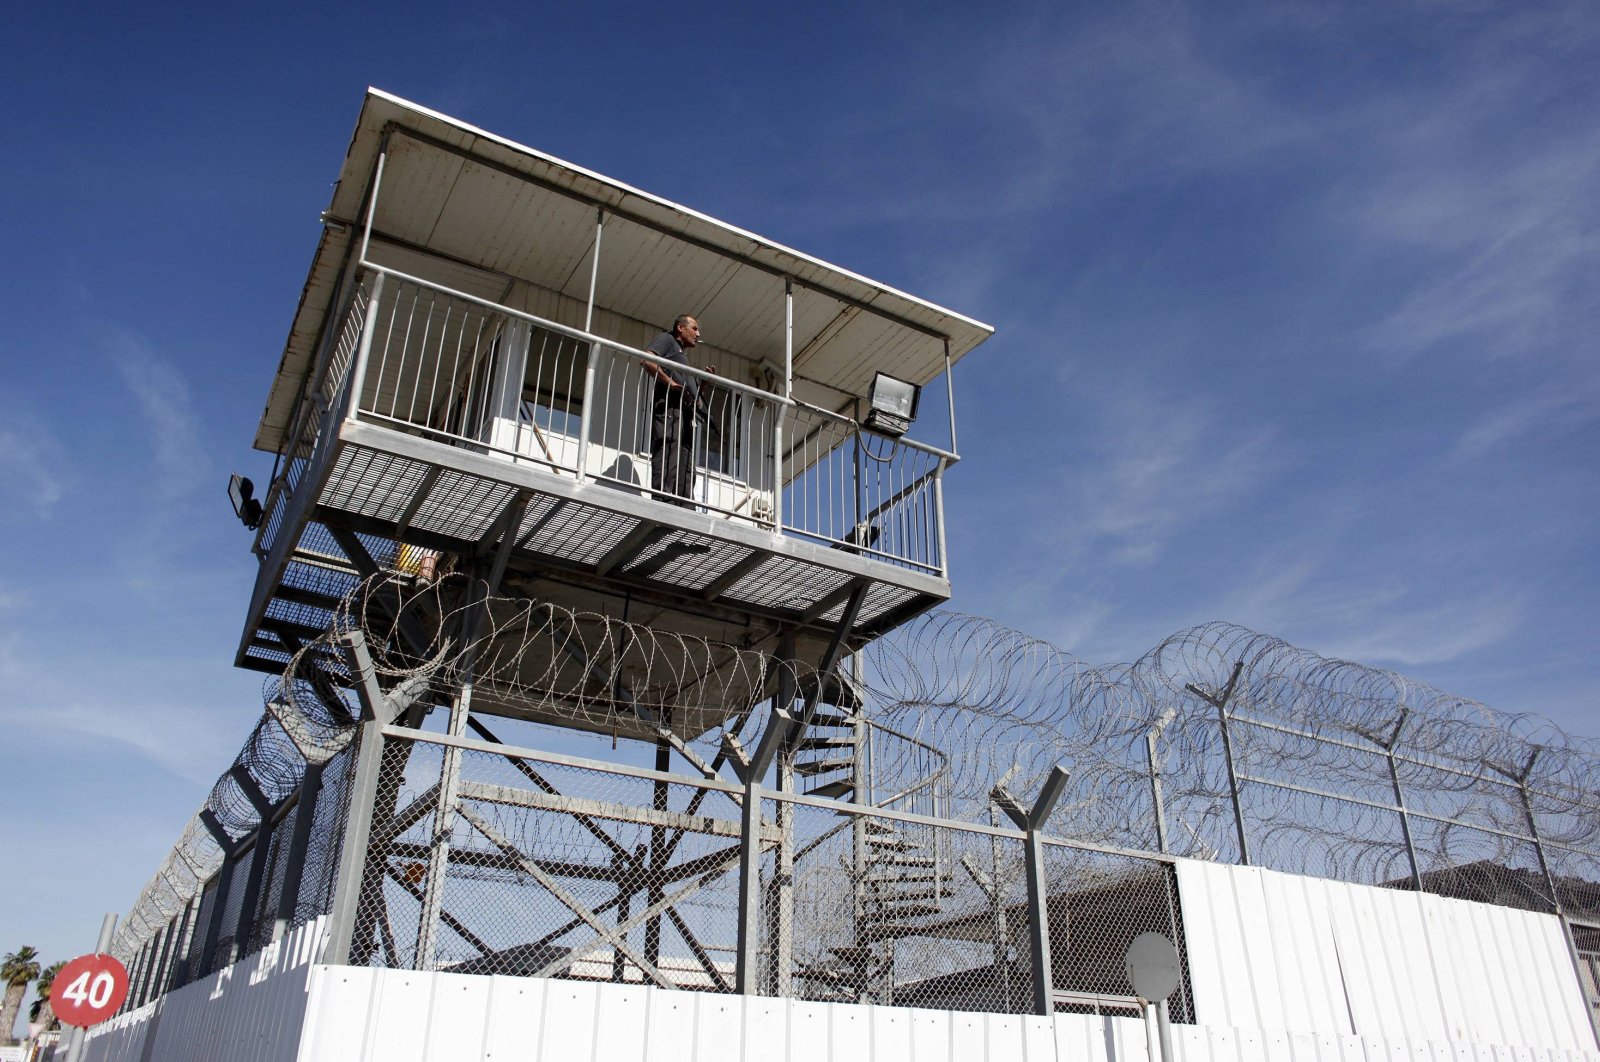 An Israeli prison guard keeps watch from a tower at Ayalon prison in Ramle near Tel Aviv, Israel, Feb. 13, 2013. (Reuters Photo)